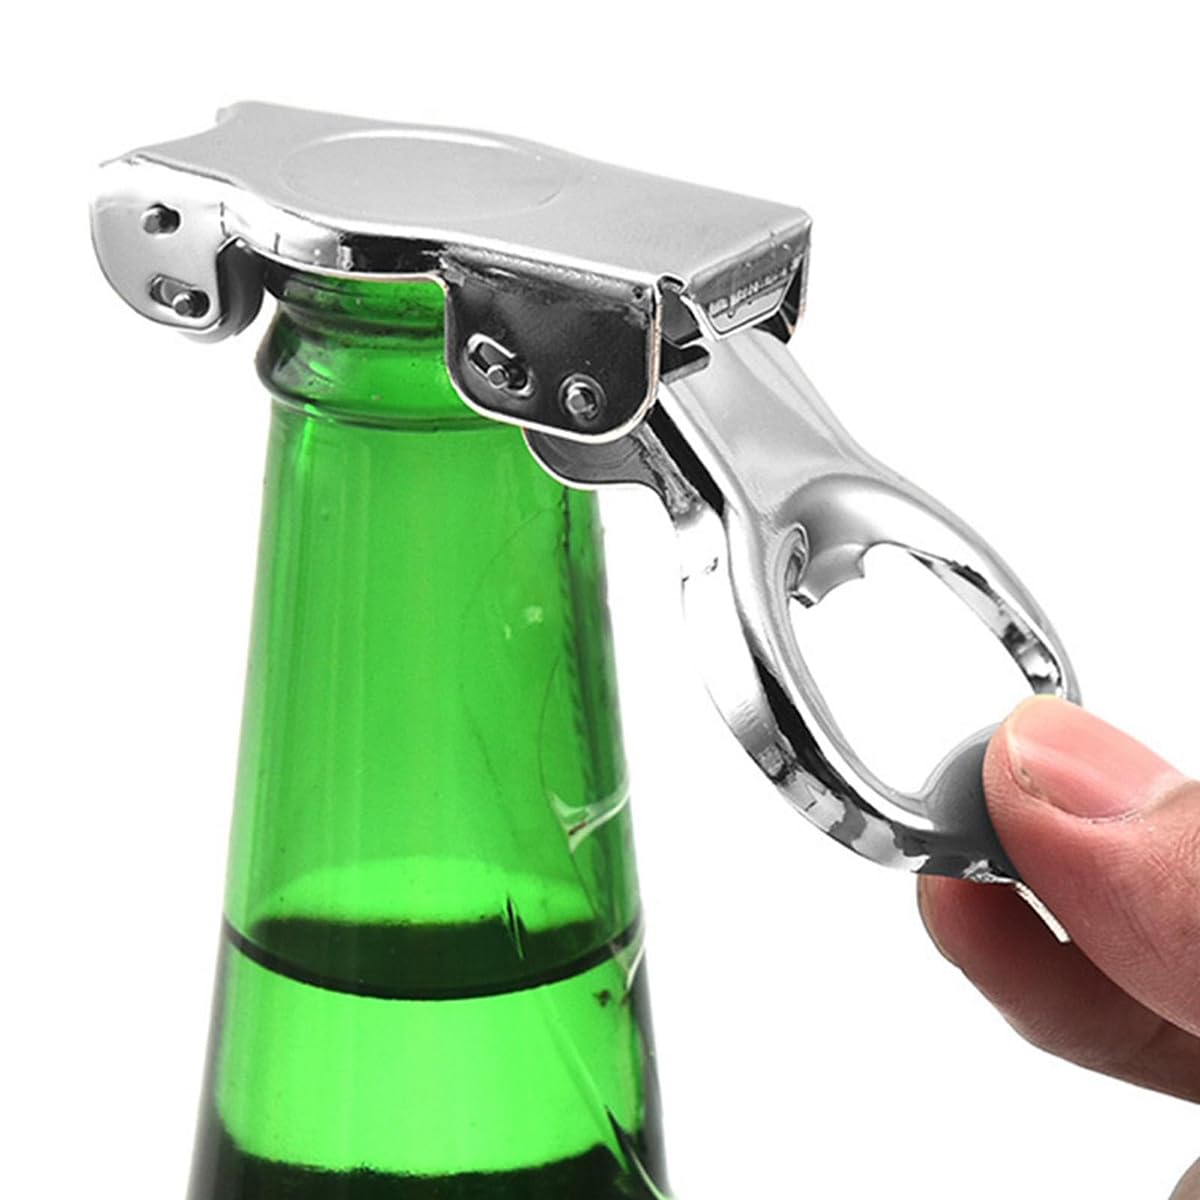 💥Factory Clearance Sale With 50% Off💥Multifunctional Folding Can Opener👇👇👇